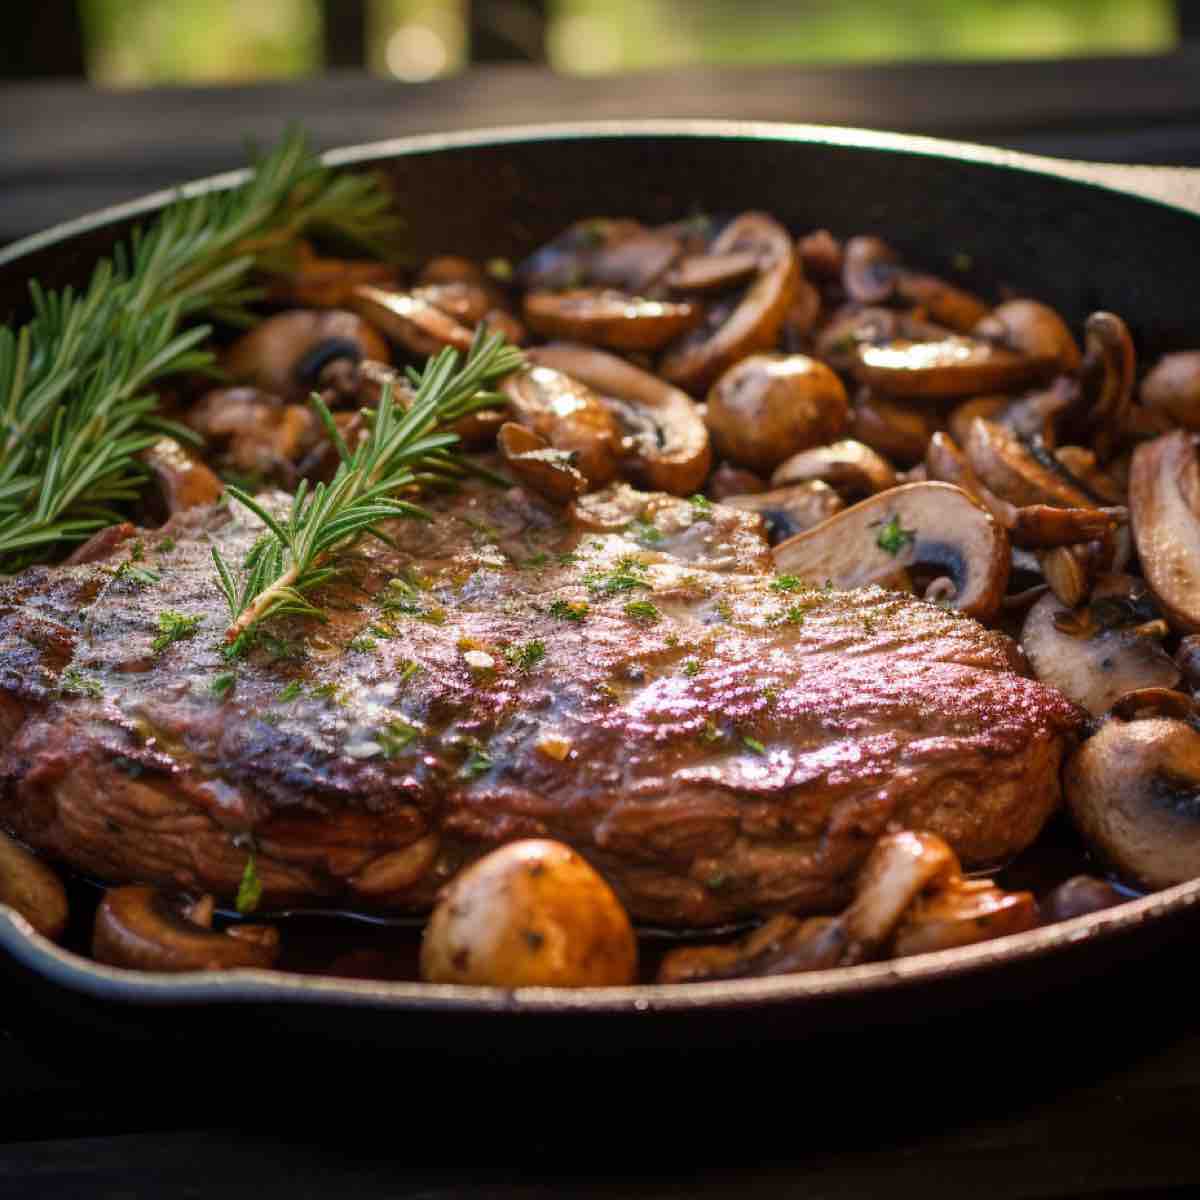 Reheat beef tenderloin in the oven or skillet to maintain its juiciness and tenderness